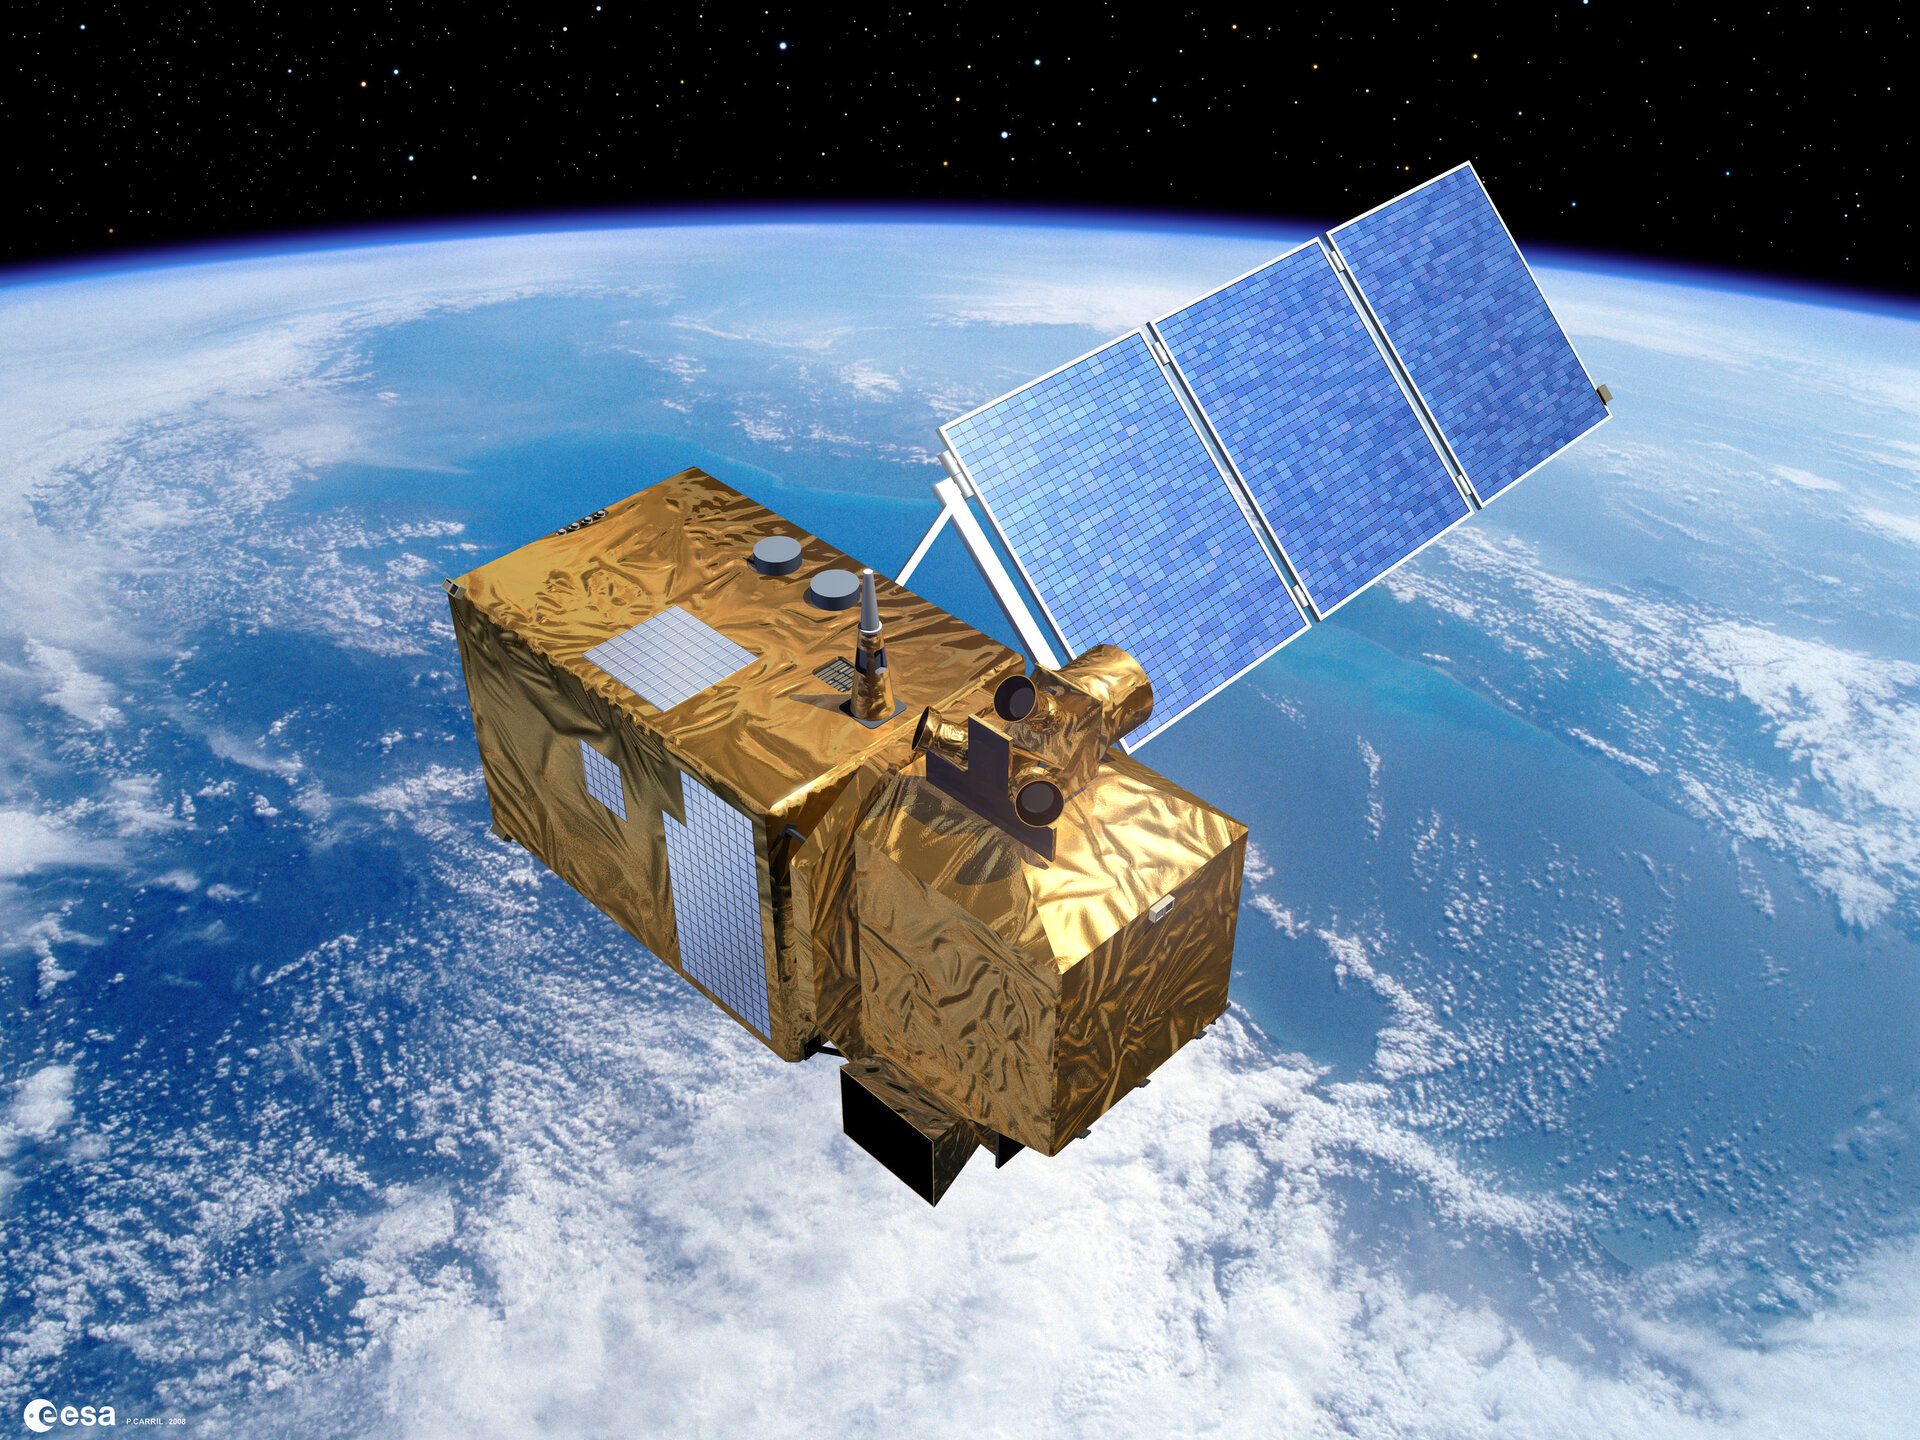 Part of the GMES Space Component, the Sentinel-2 satellite